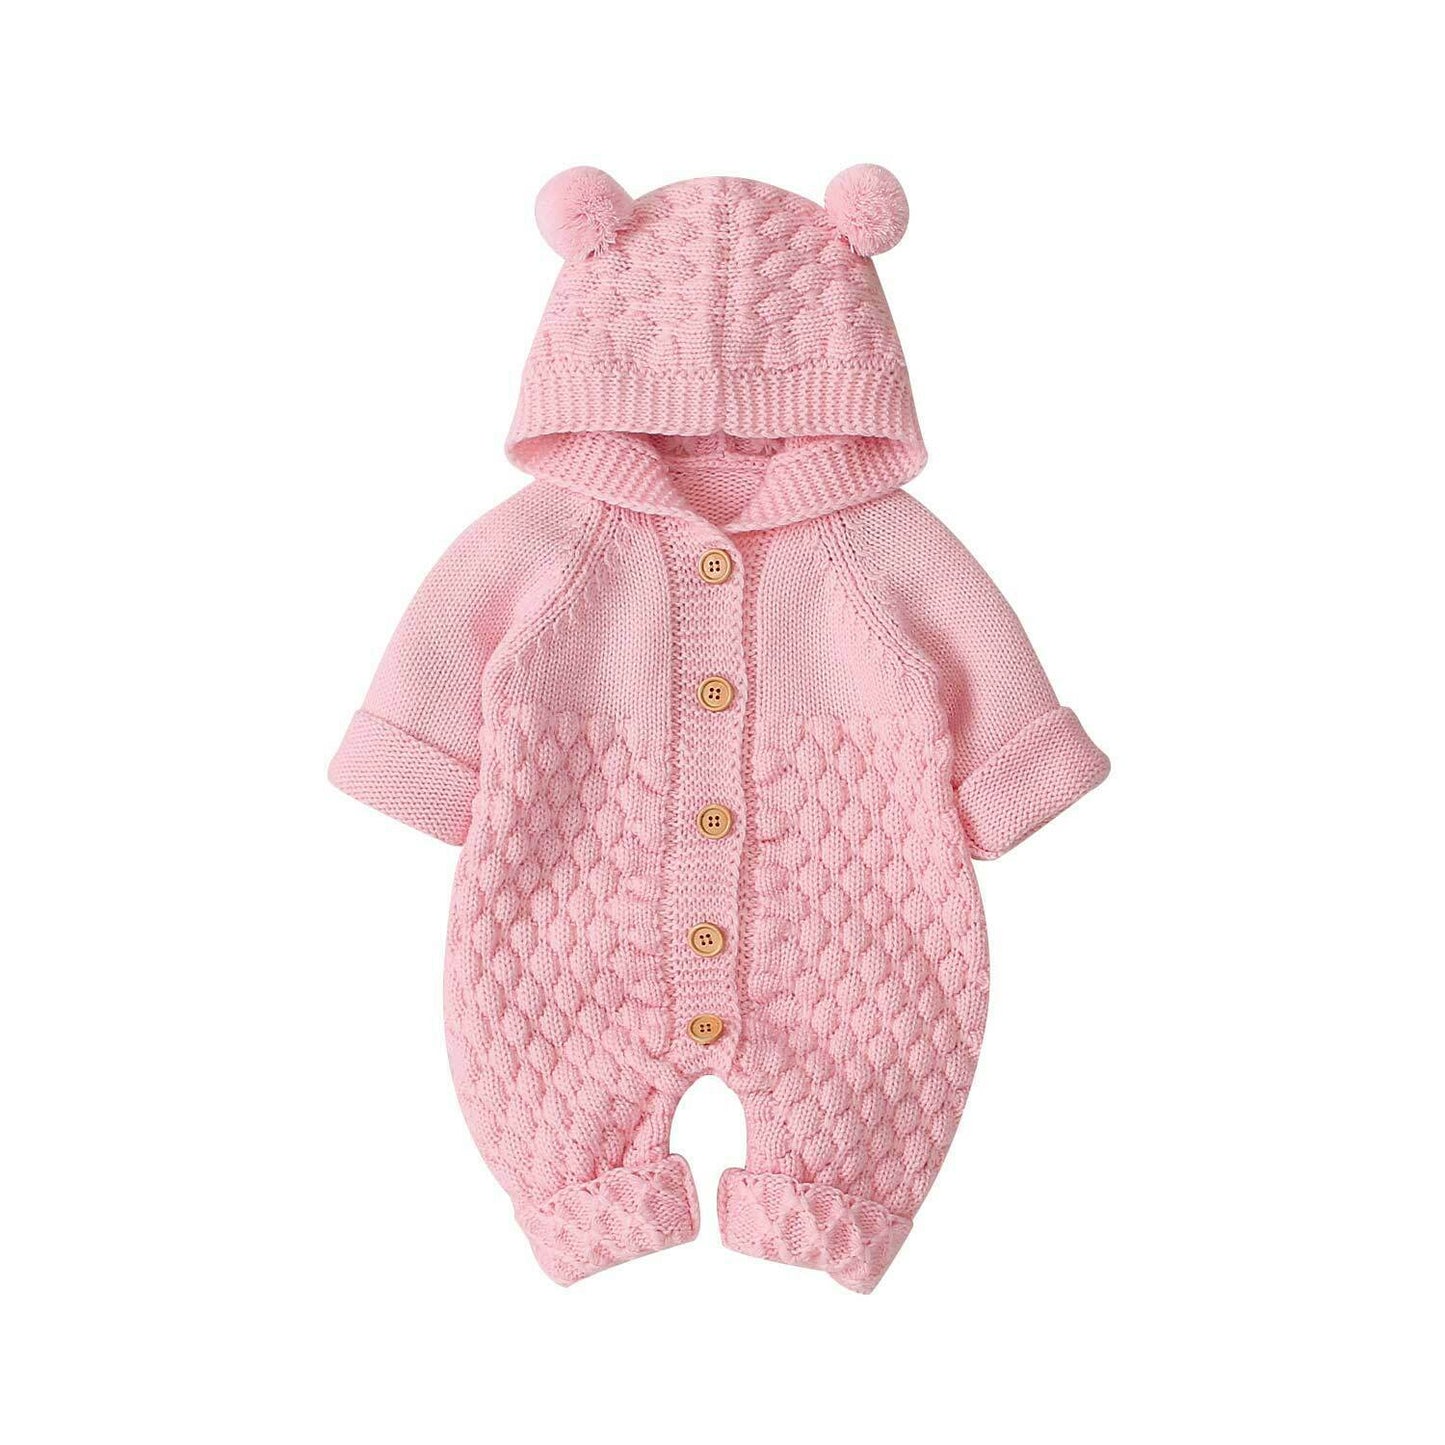 Newborn Infant Unisex Autumn-Winter Knitted Jumpsuit with a Hood - White, Pink